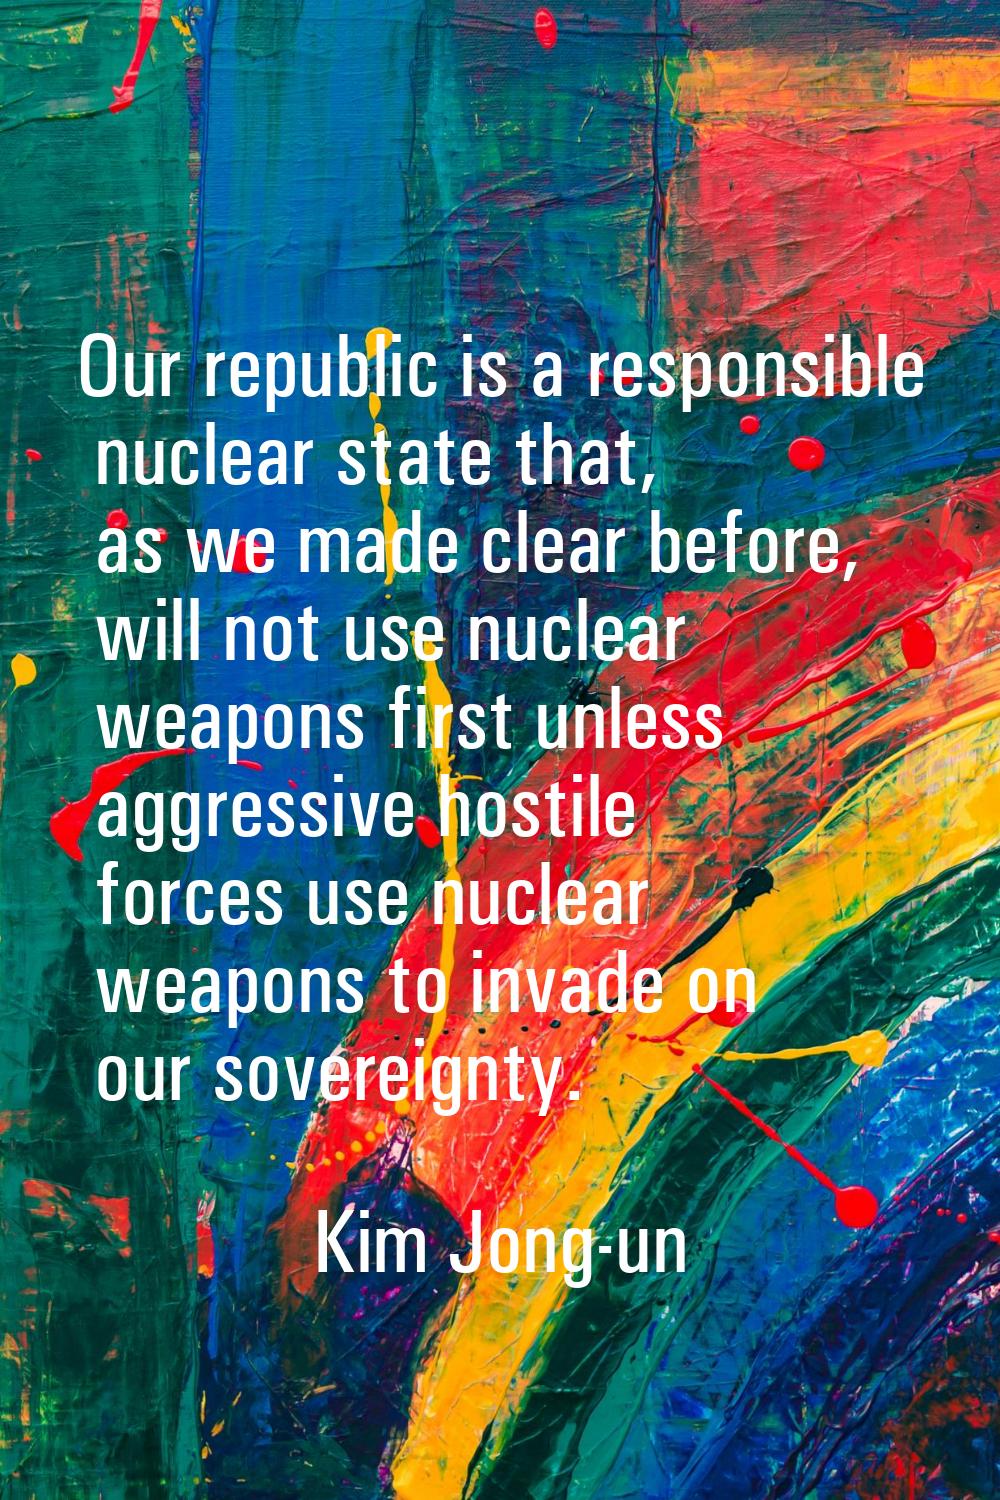 Our republic is a responsible nuclear state that, as we made clear before, will not use nuclear wea